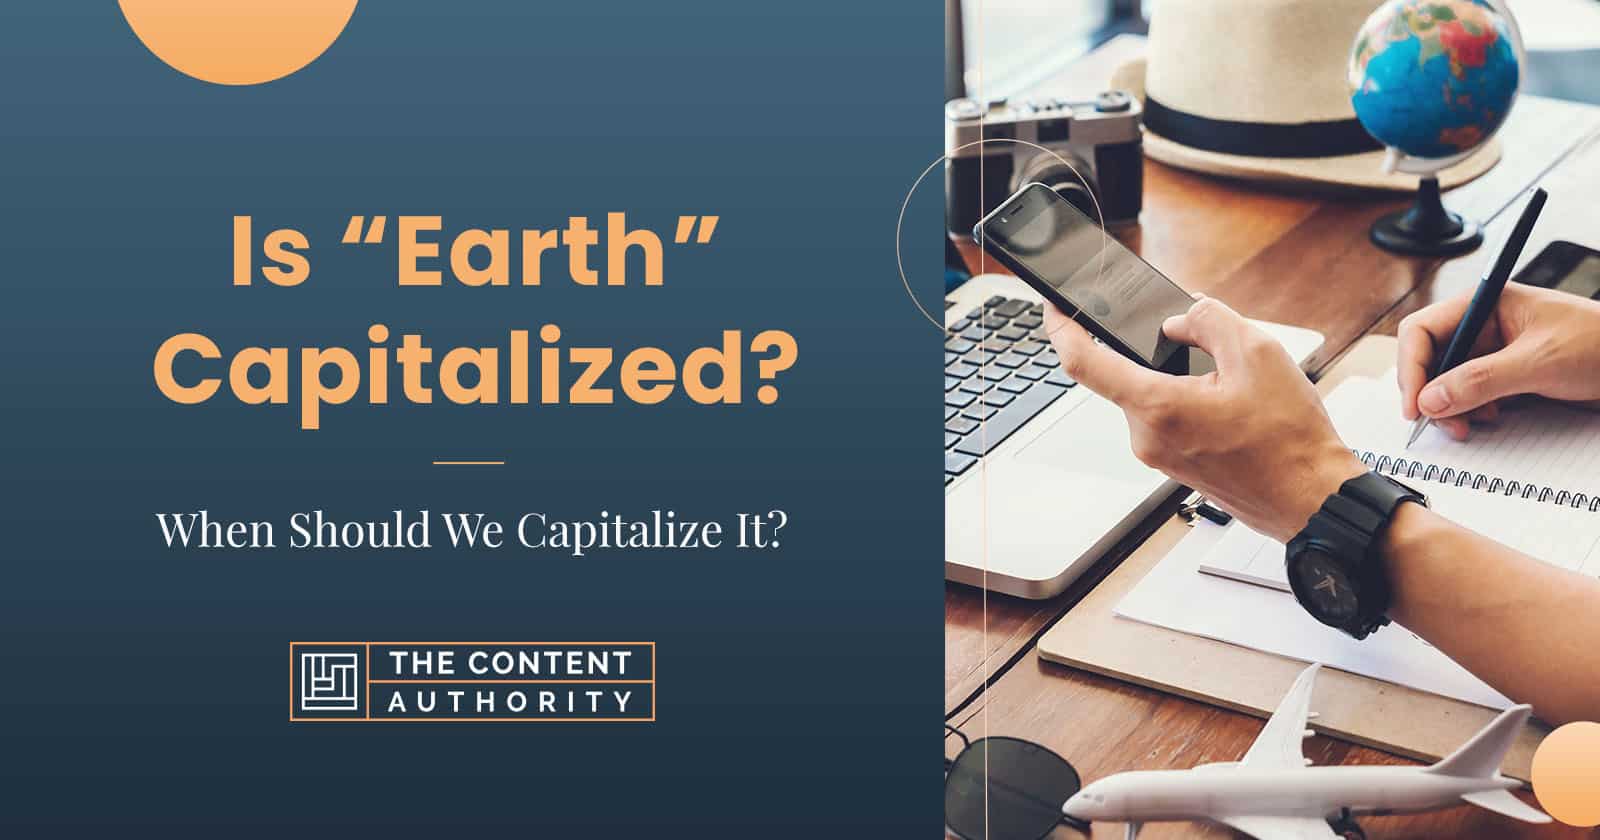 Is “Earth” Capitalized? When Should We Capitalize It?